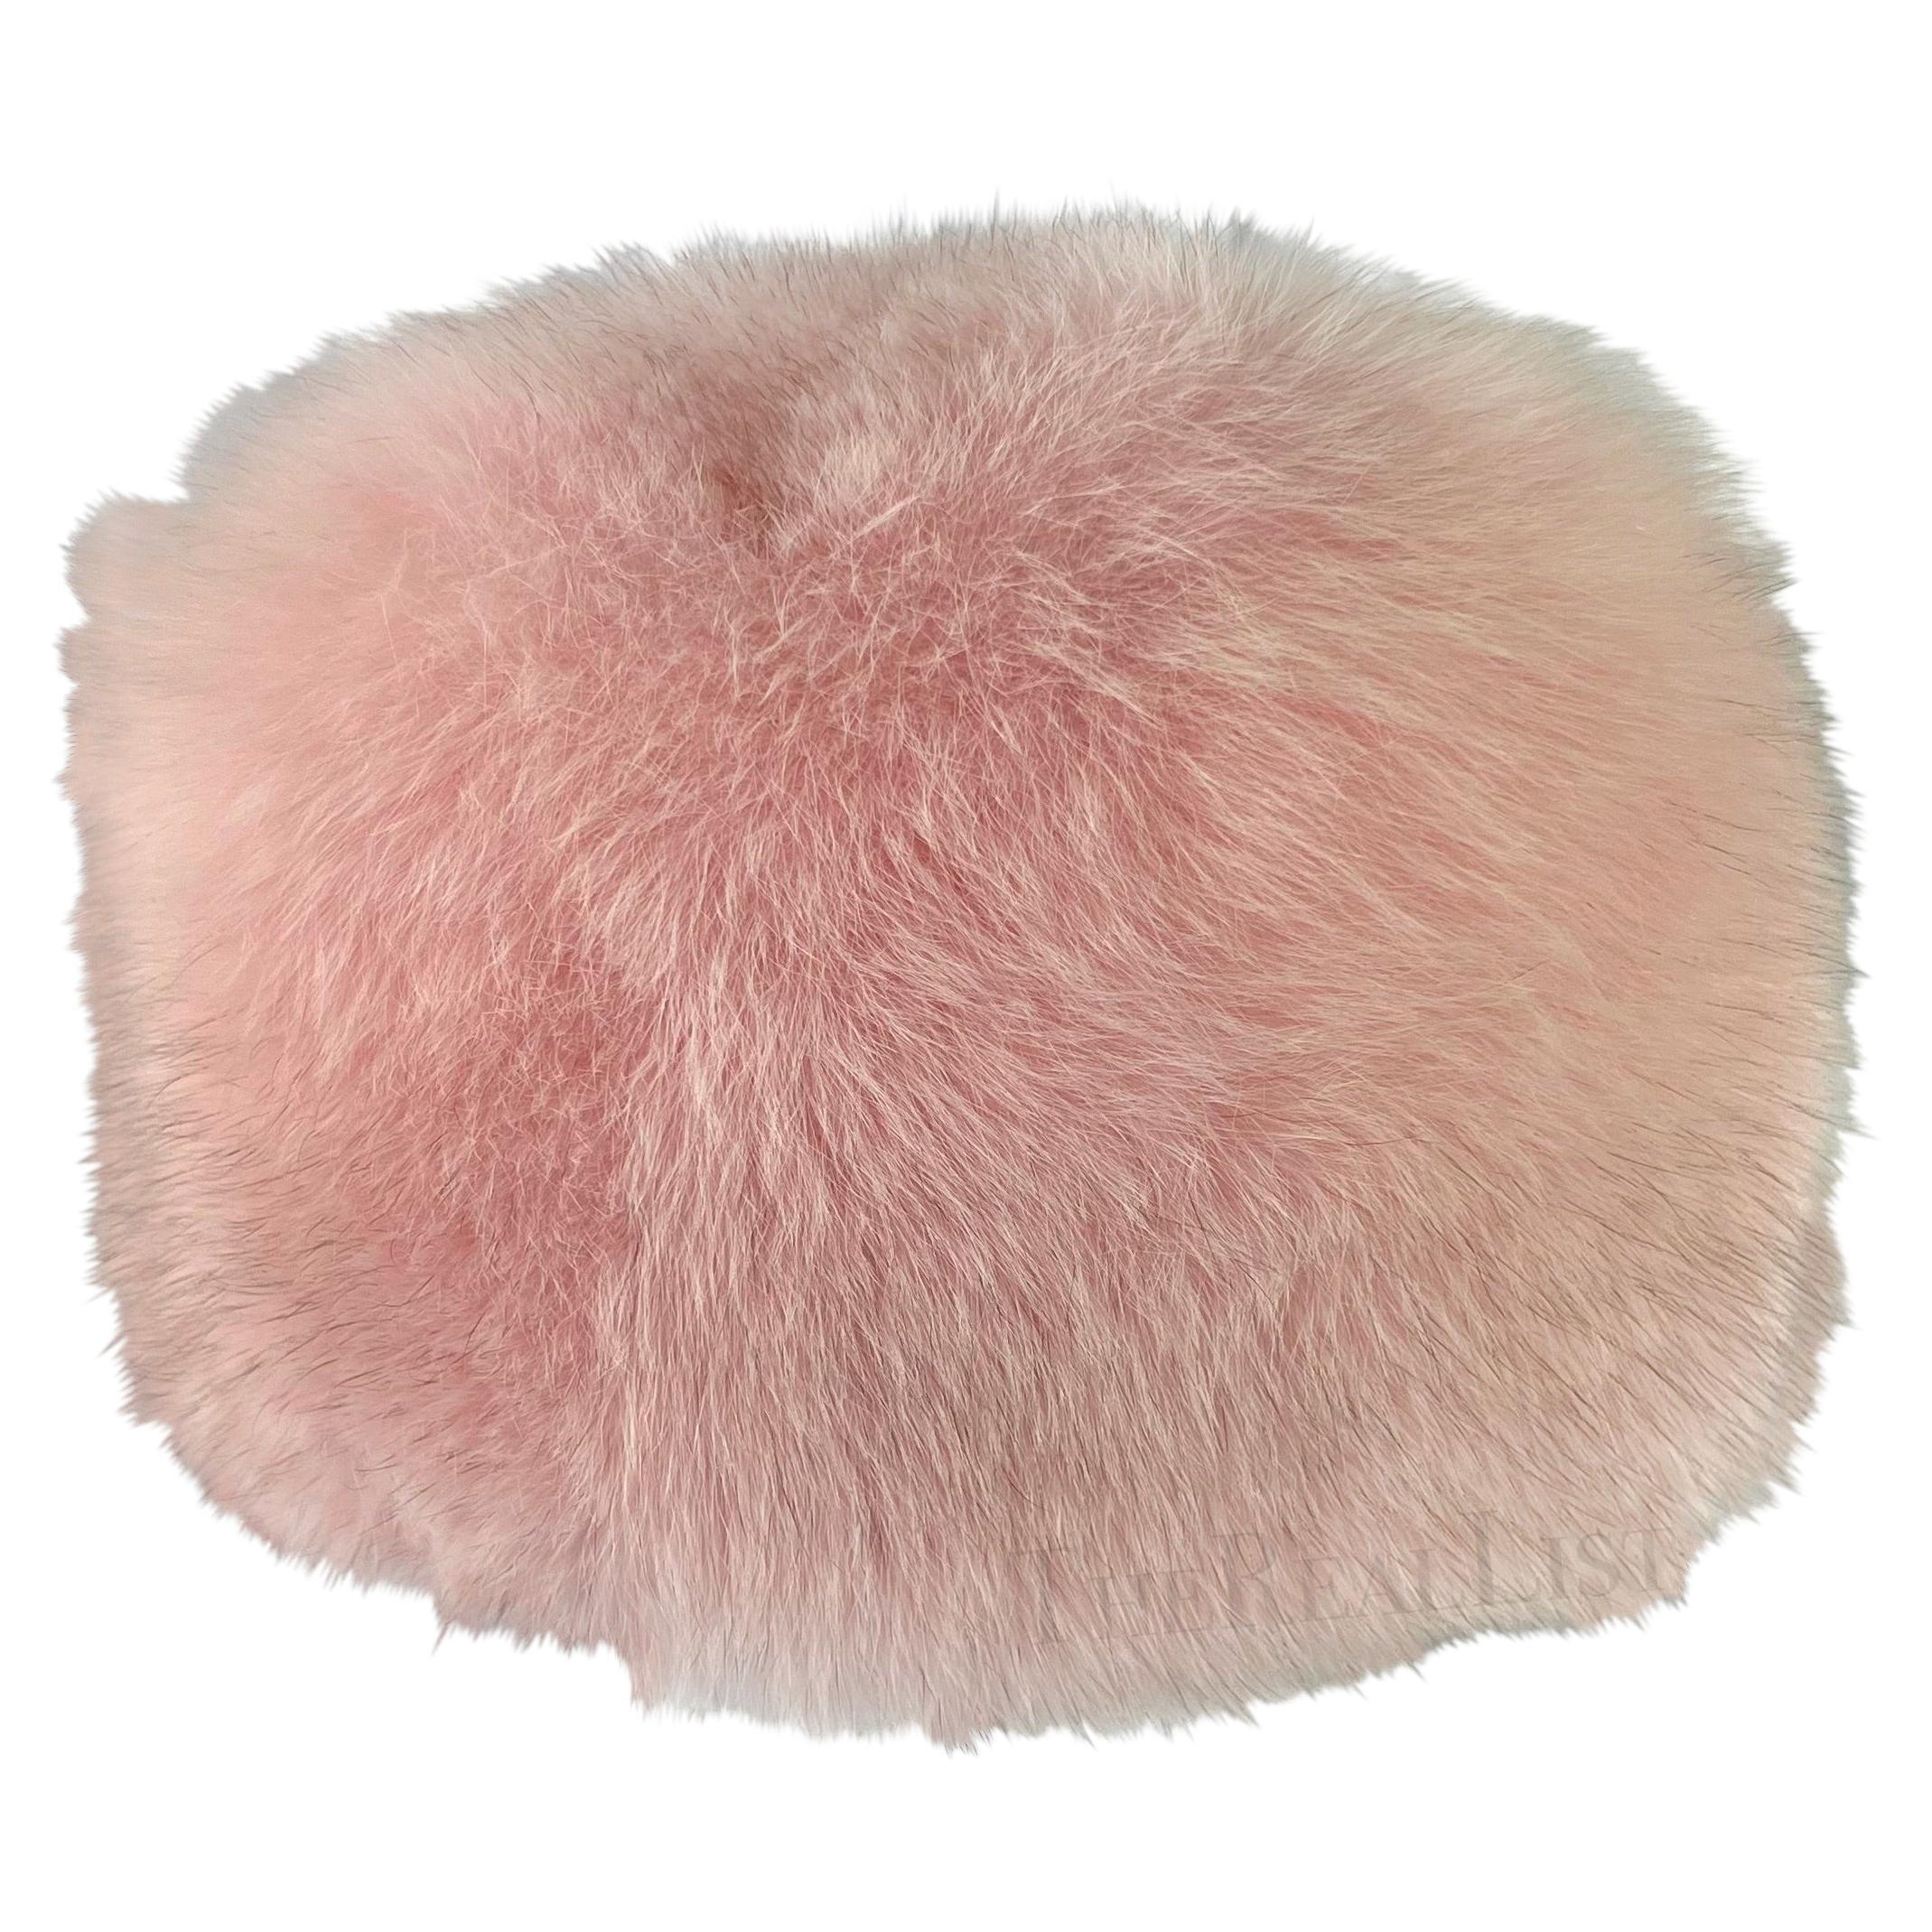 Early 2000s Burberry Pink Fox Fur Pill Box Hat For Sale